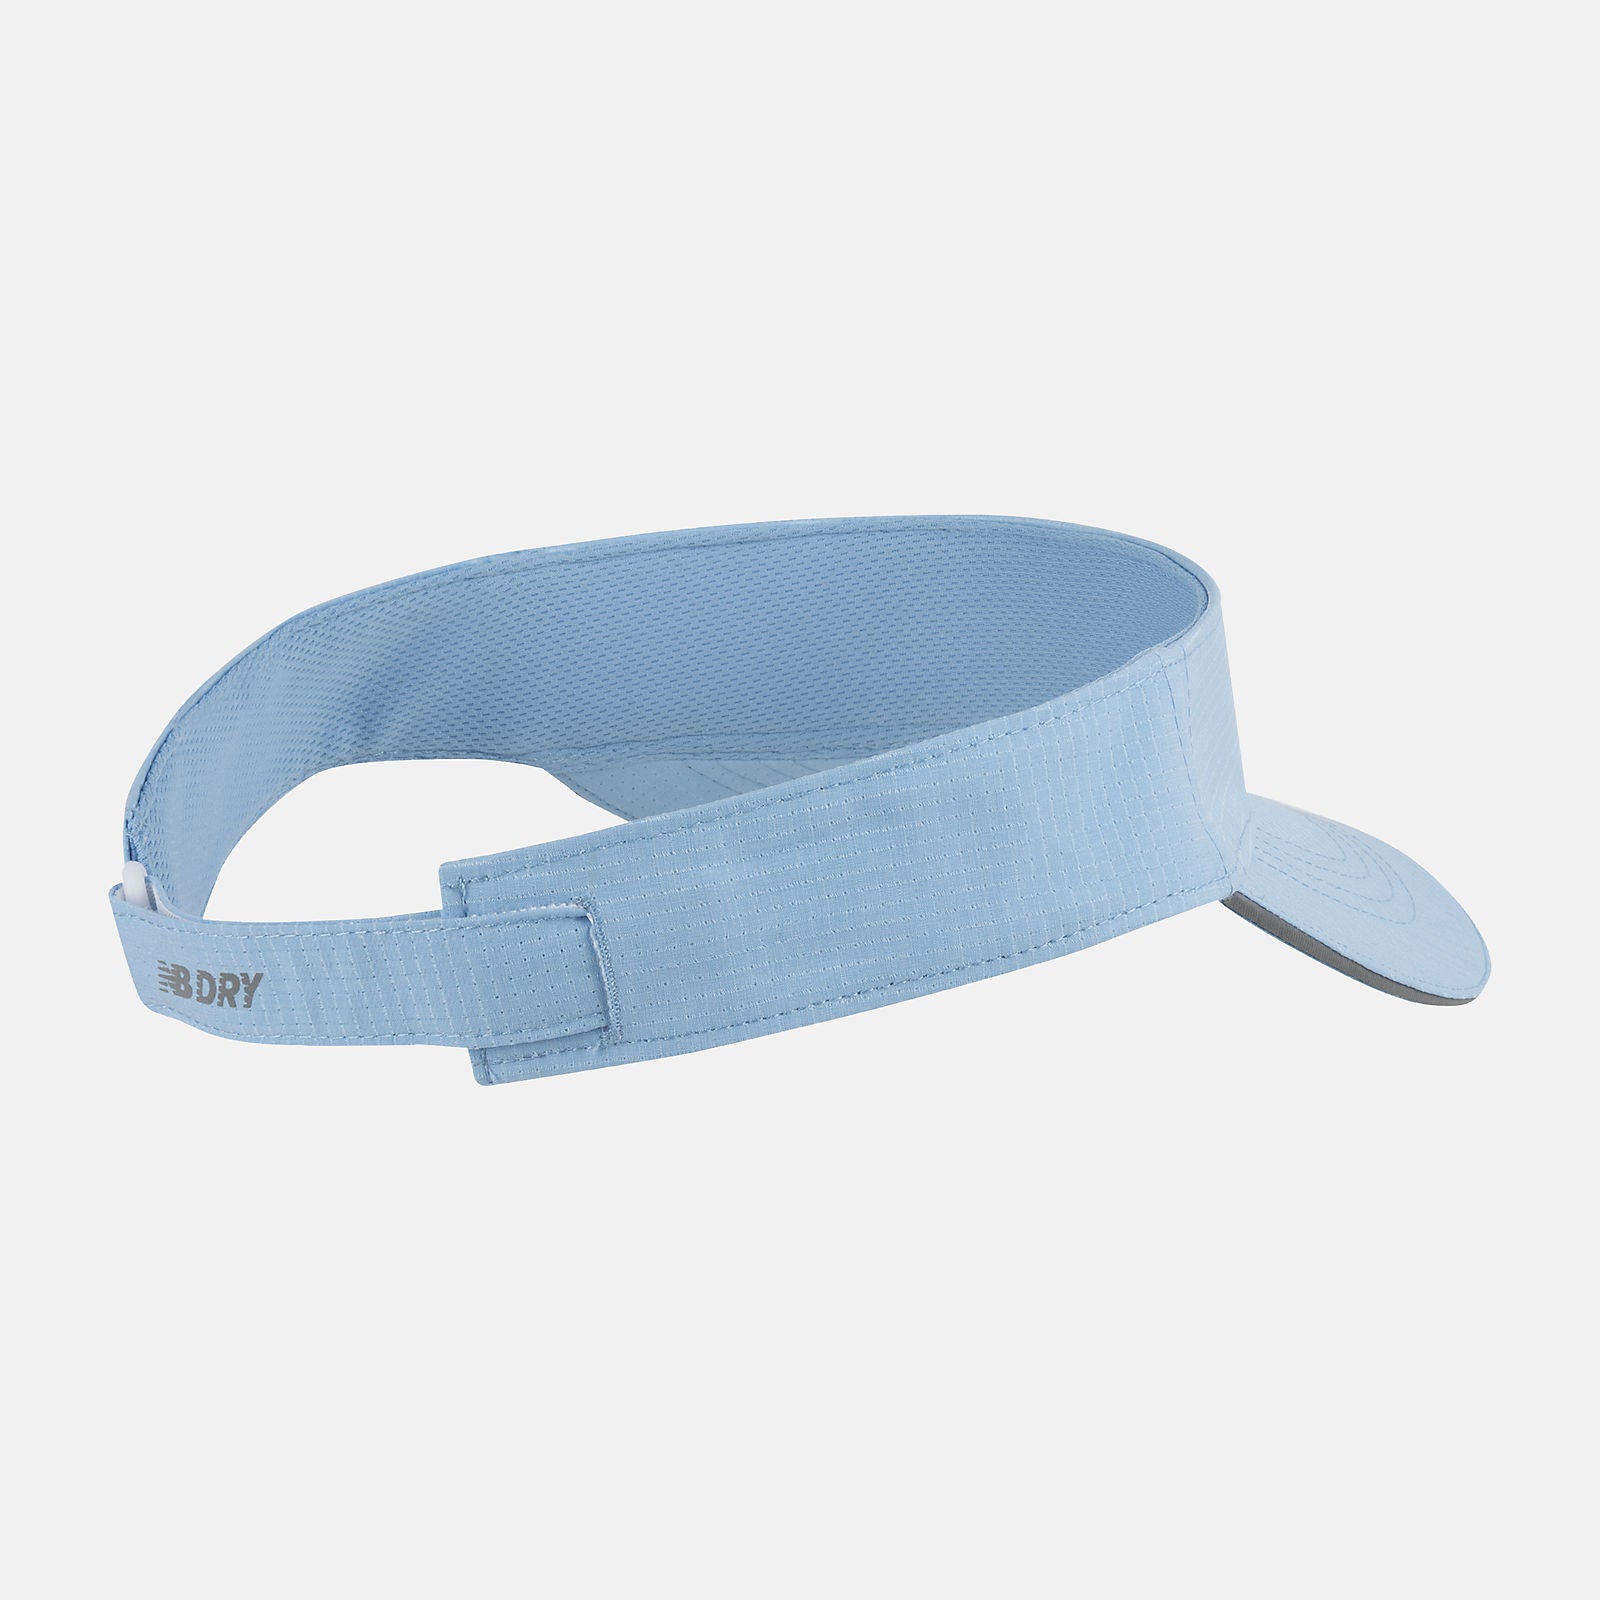 NEW BALANCE Performance Visor in Blue Haze LAH21105 O/S BLUE HAZE FROM EIGHTYWINGOLD - OFFICIAL BRAND PARTNER